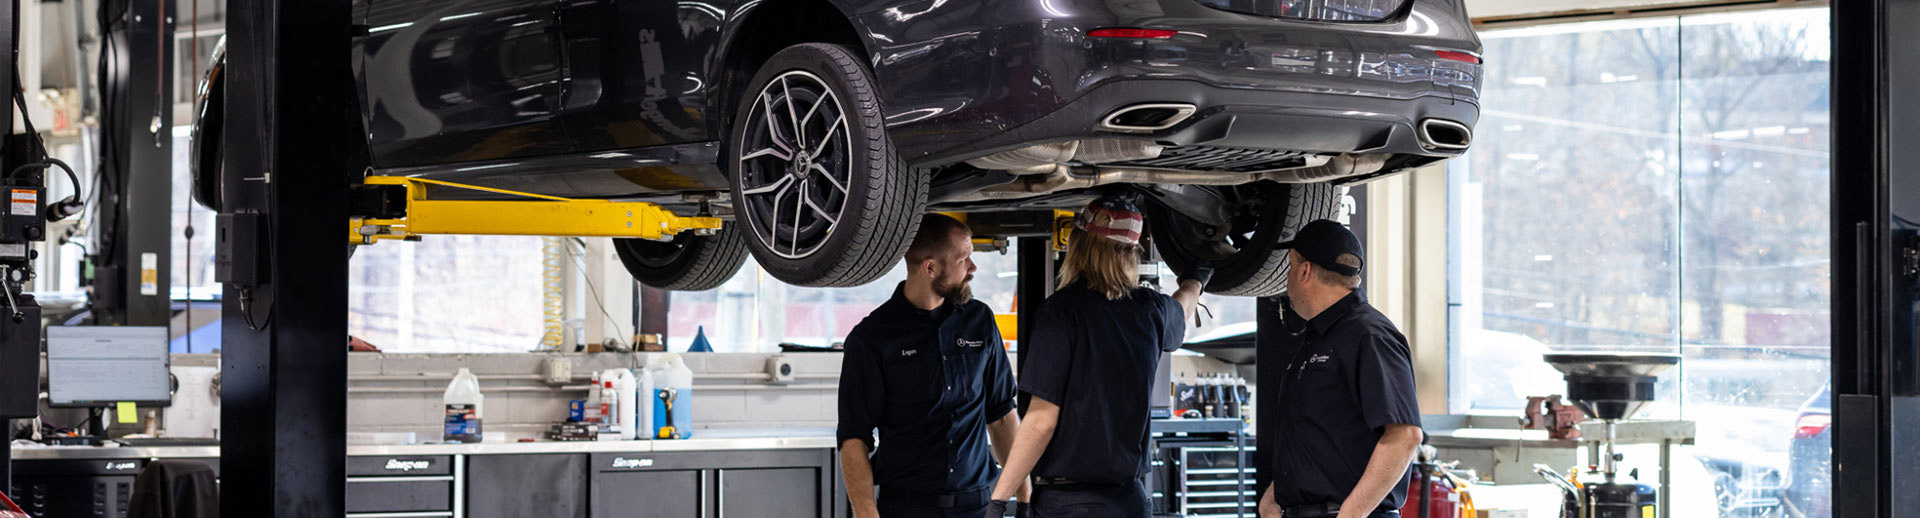 Photo of service techs inspecting the tires of a vehicle